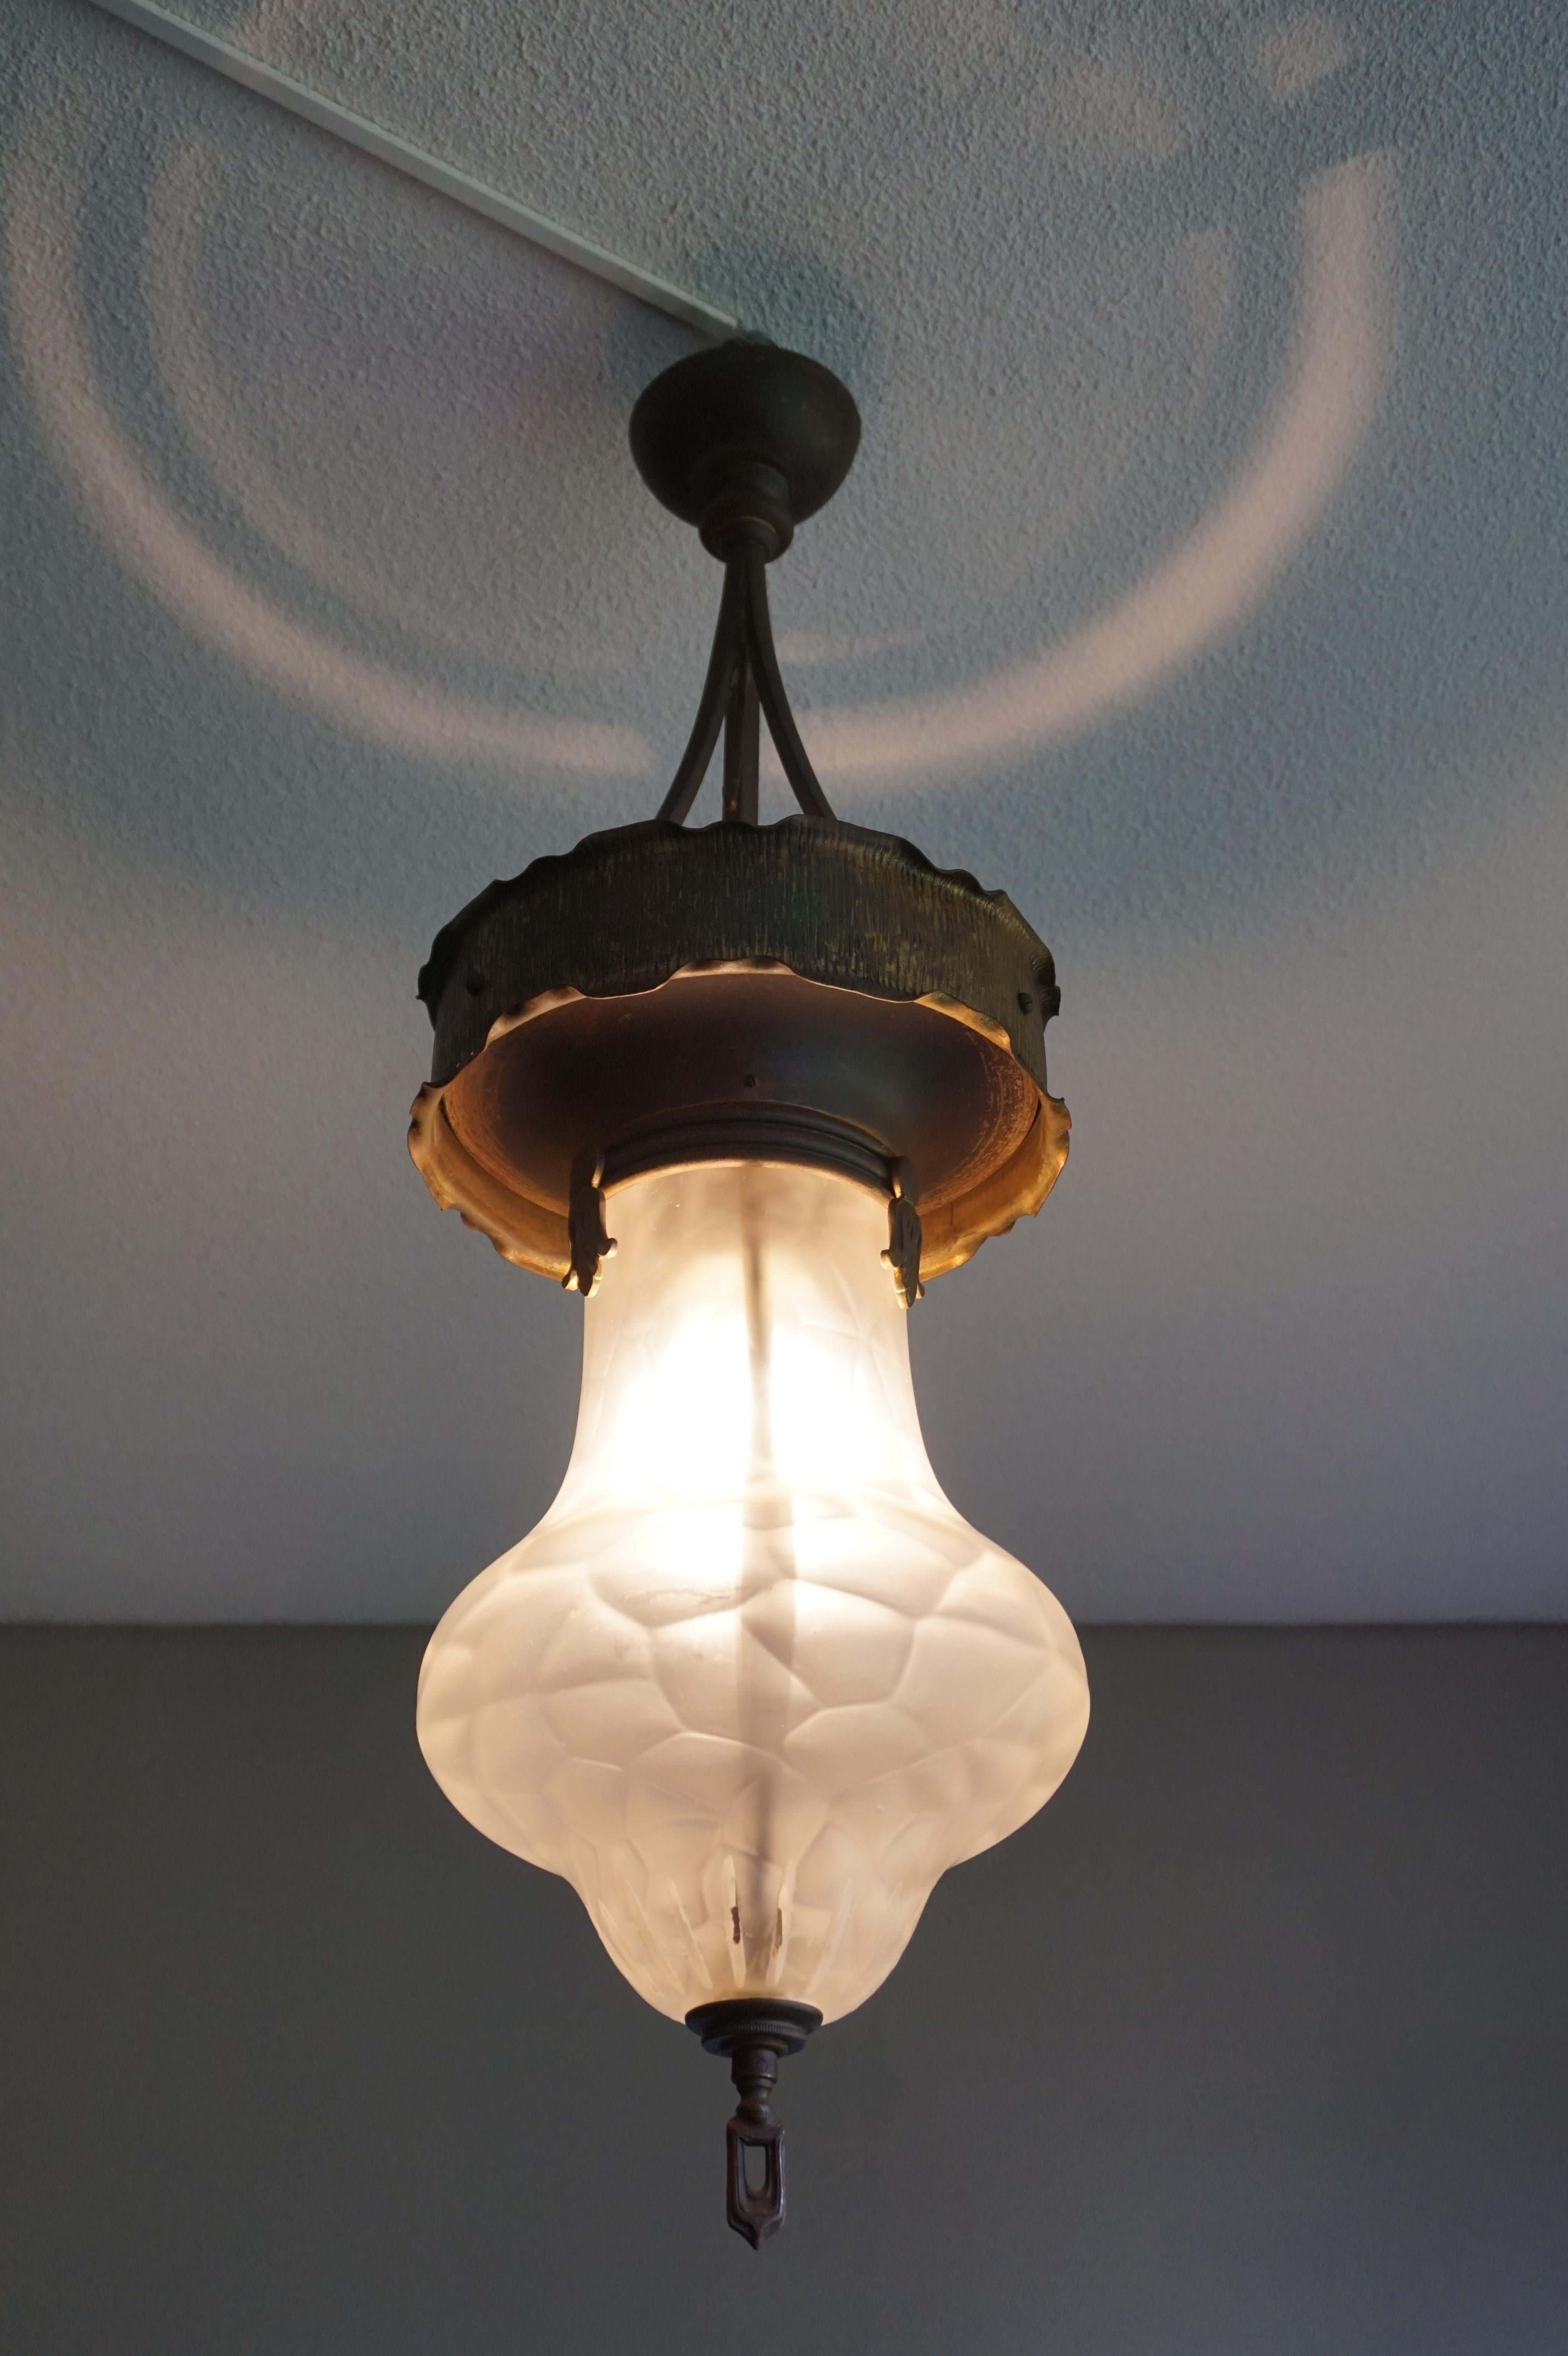 Stunning and all handcrafted hallway pendant light for the collectors of rare and beautiful.

With this striking light fixture being a former gas operated light, this certainly is one of the earliest Arts & Crafts fixtures that we ever had the